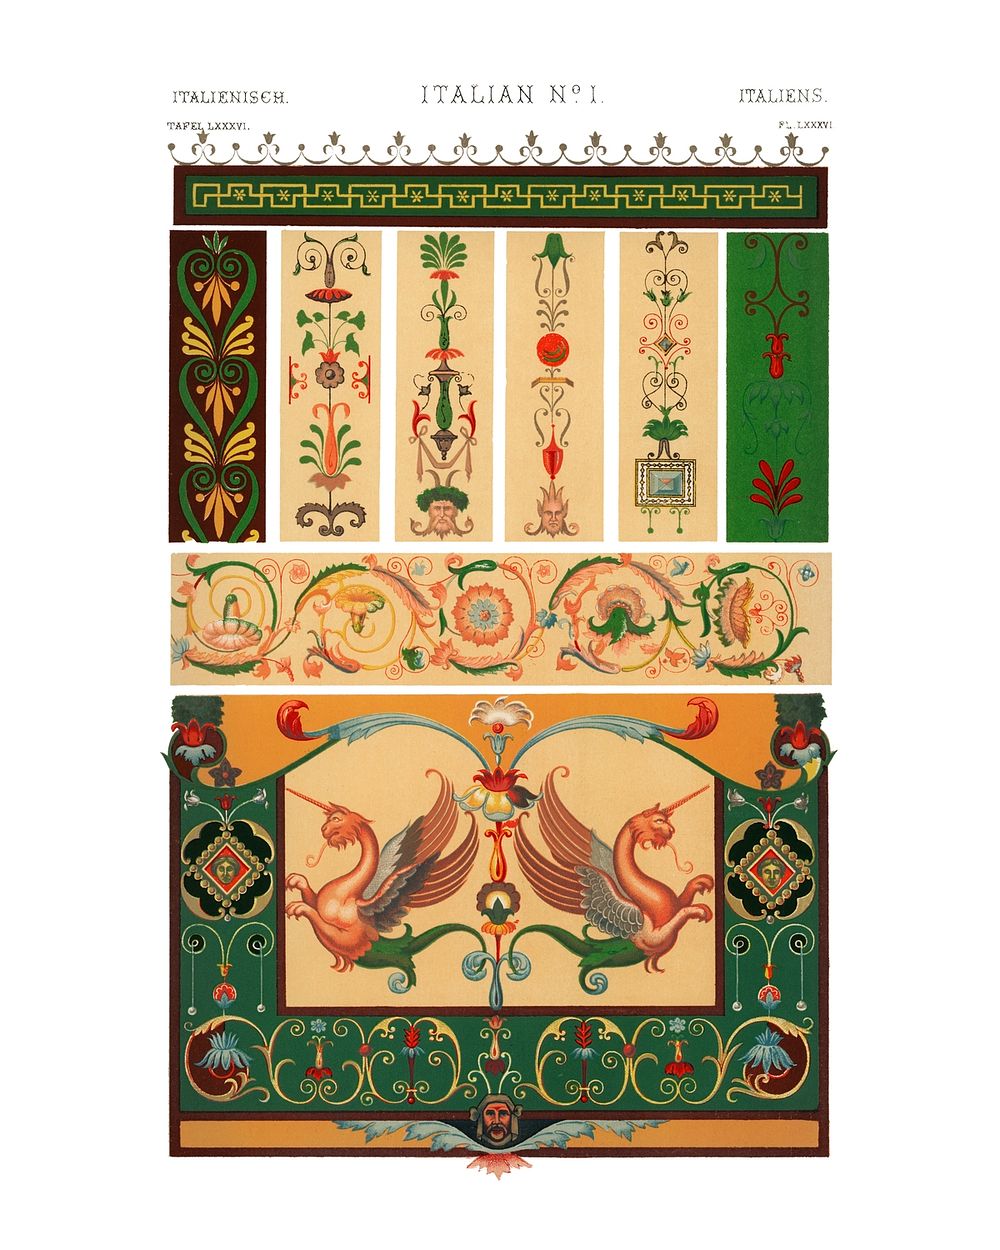 Vintage Italian ornaments wall art print and poster.